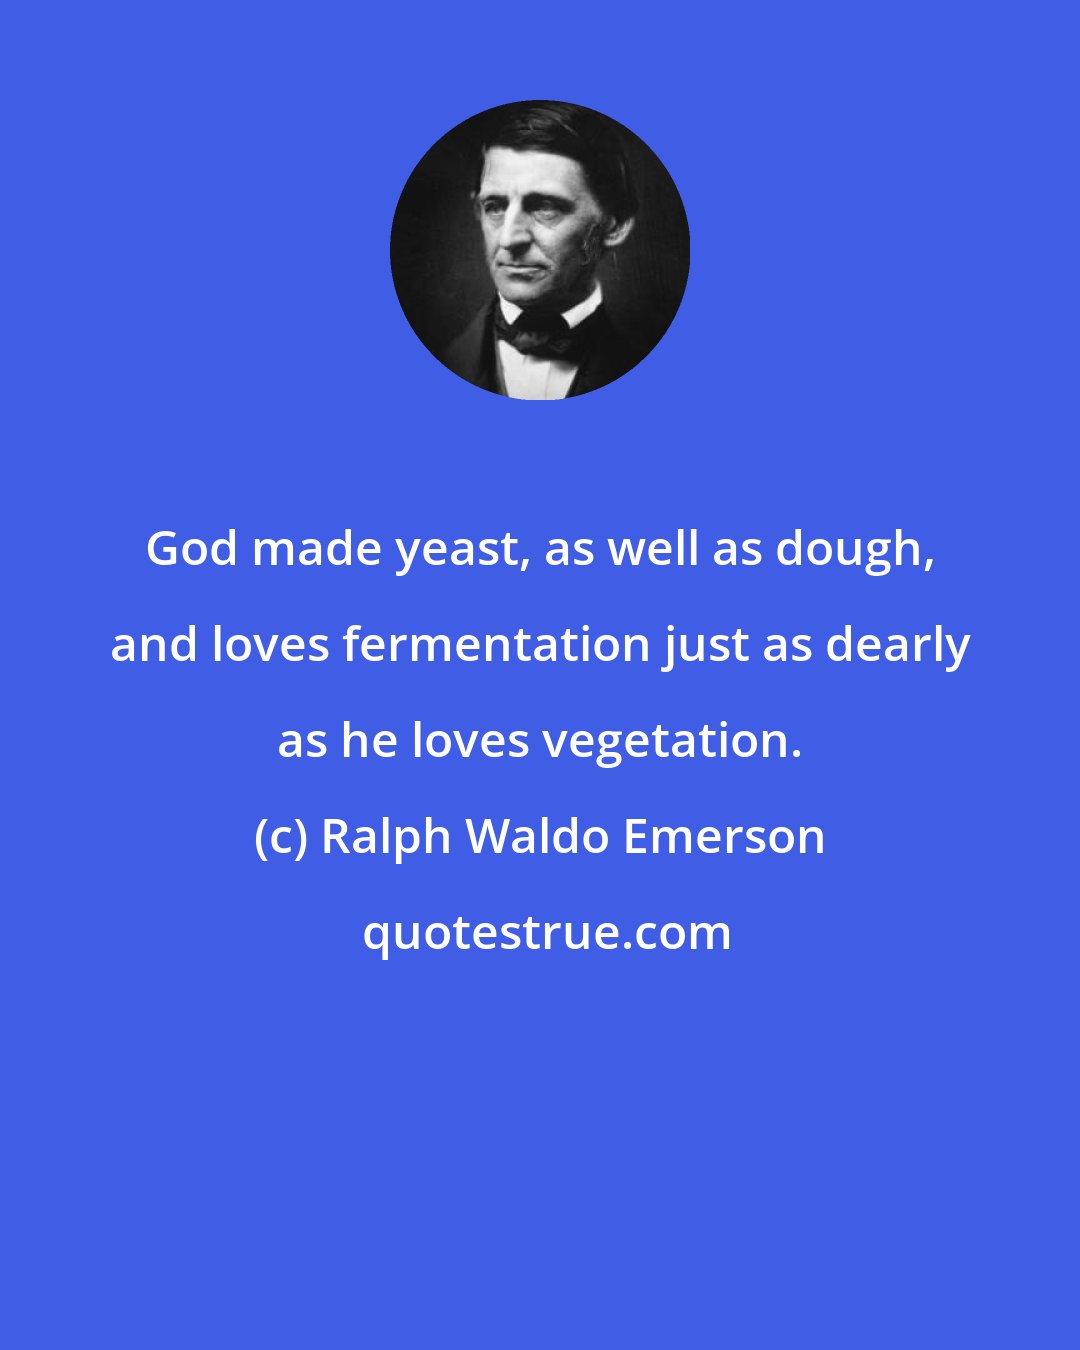 Ralph Waldo Emerson: God made yeast, as well as dough, and loves fermentation just as dearly as he loves vegetation.